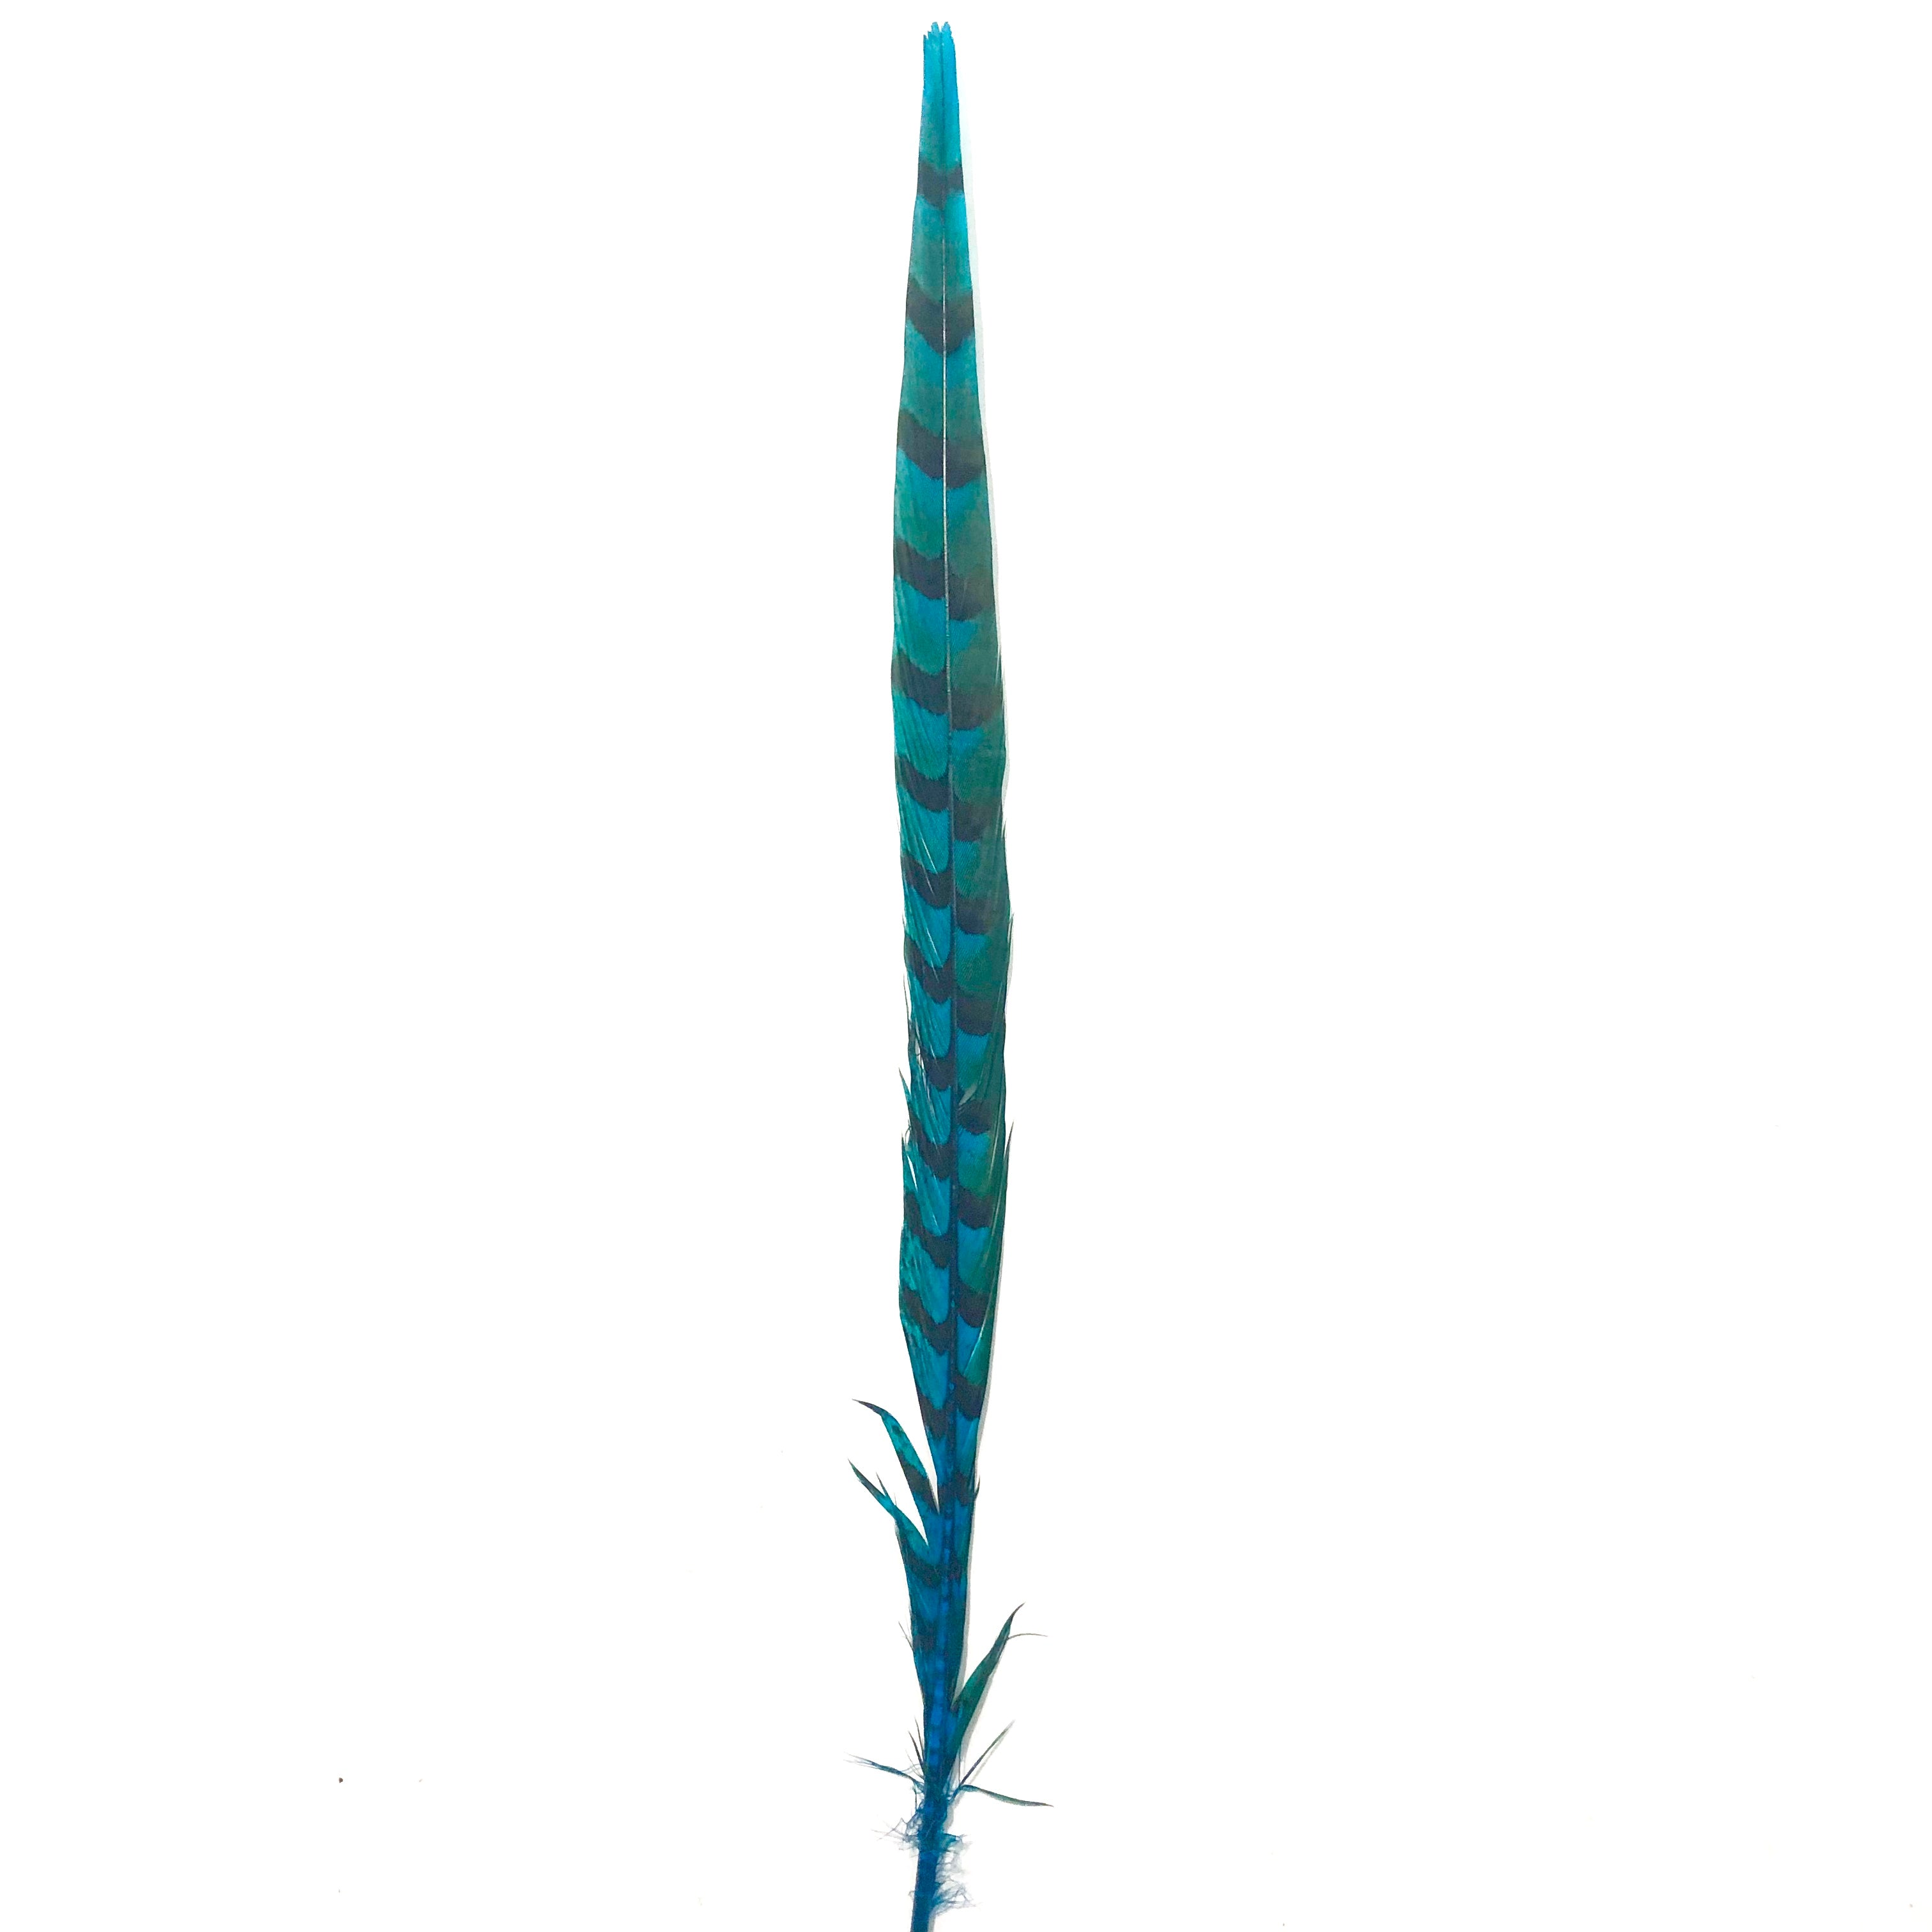 18" to 20" Reeves Pheasant Tail Feather - Turquoise